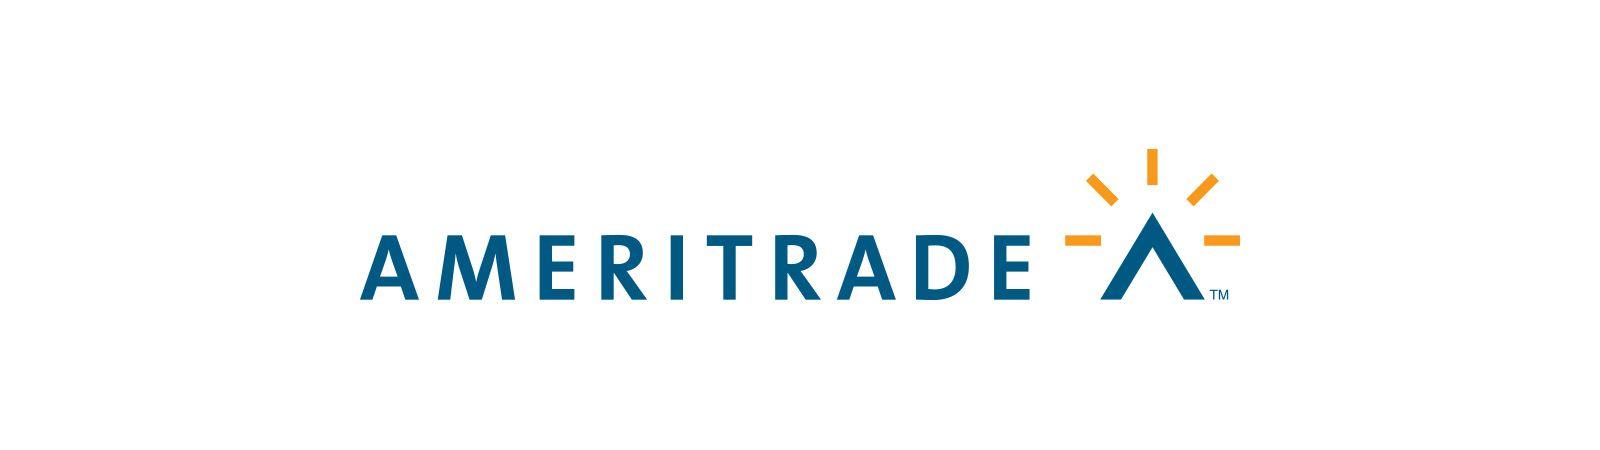 Ameritrade Logo - Ameritrade. Technology Sector. TA. A Private Equity Firm